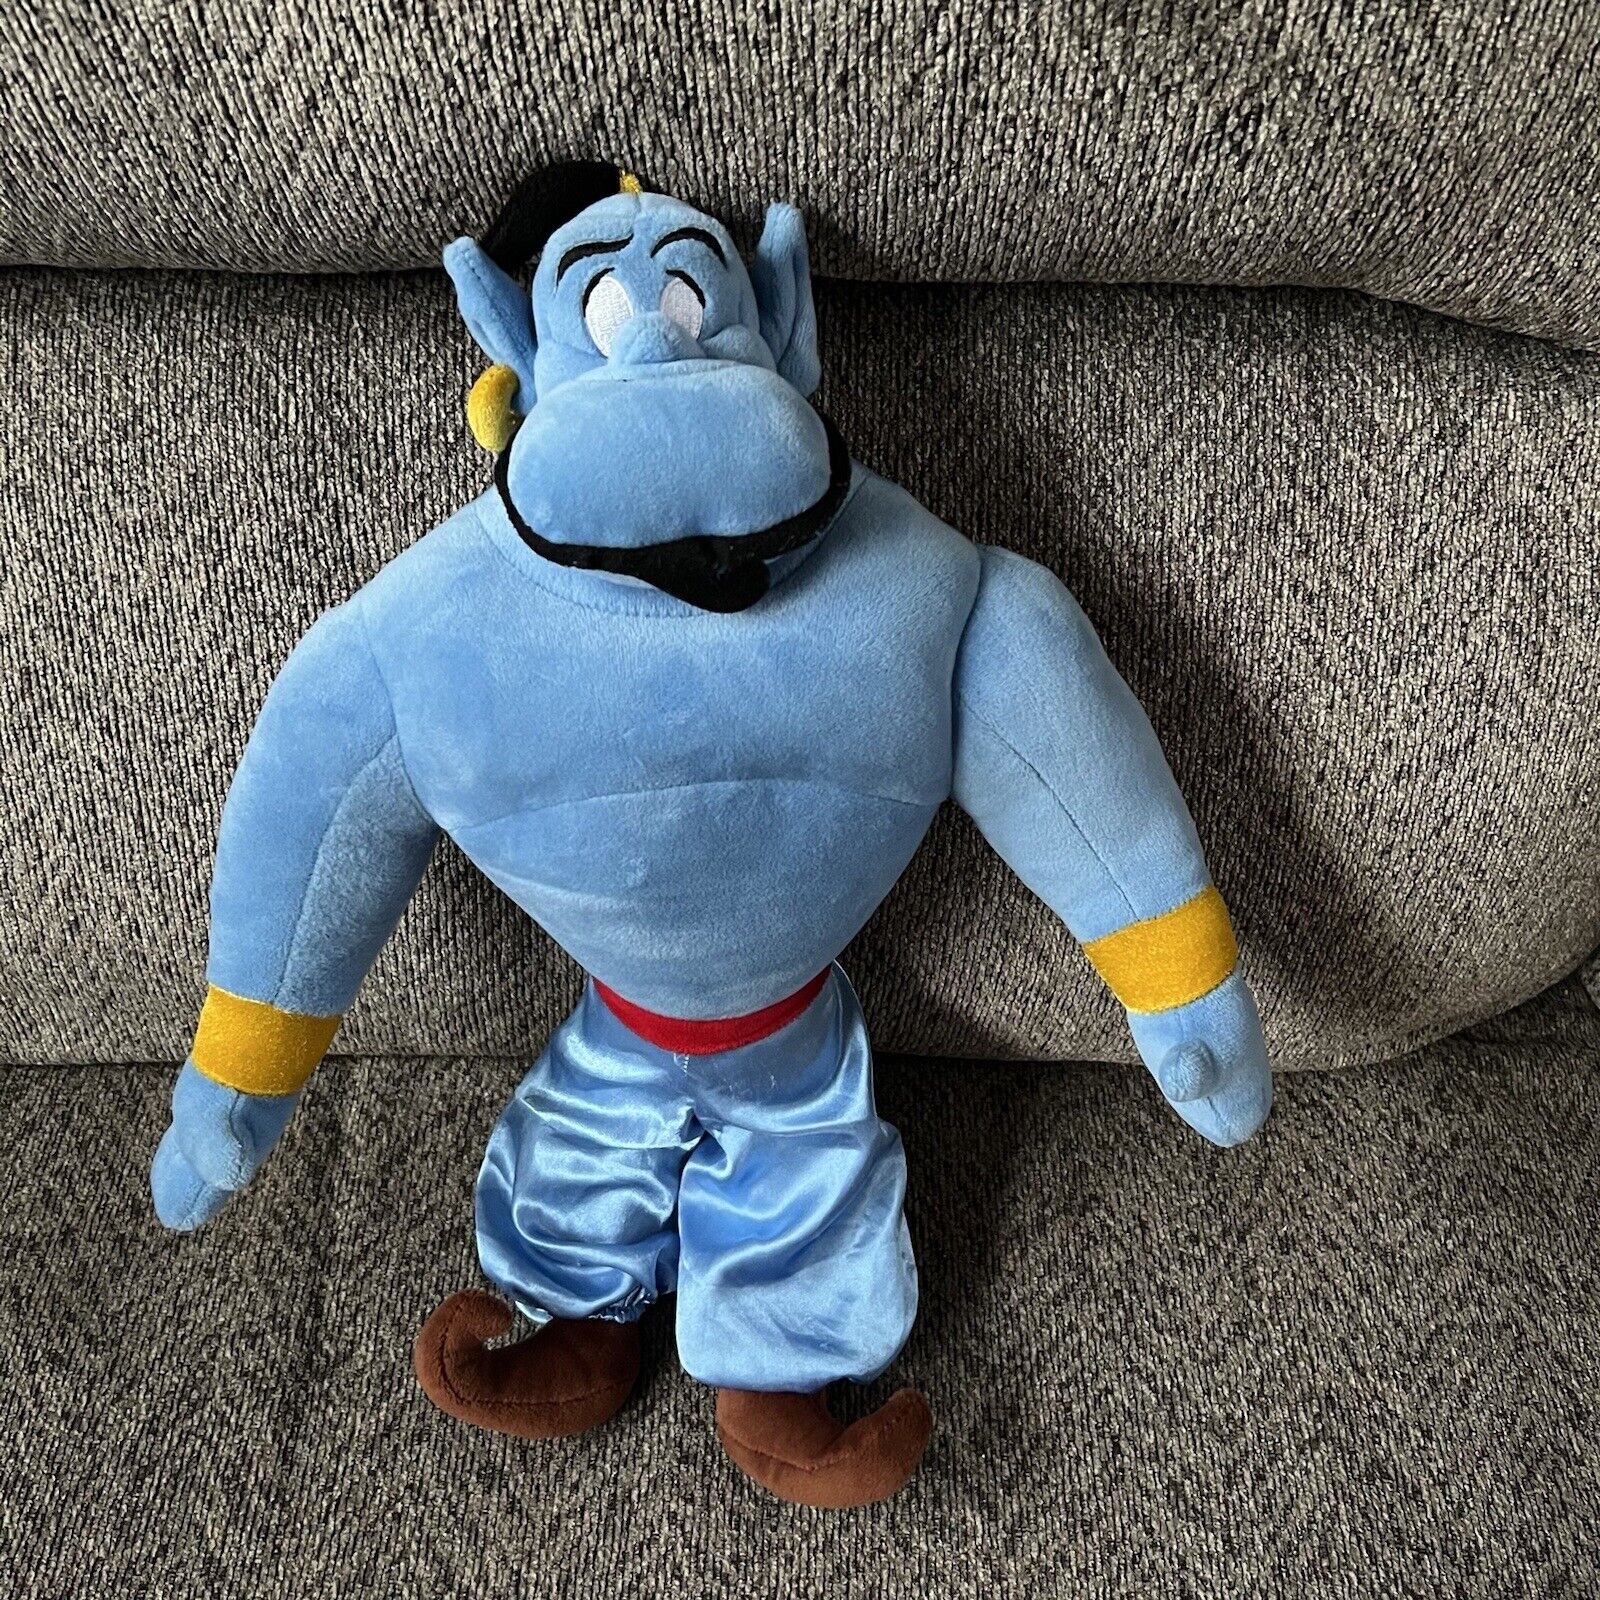 Disney Store The Genie from Aladdin Stuffed Plush Toy with Tag 18